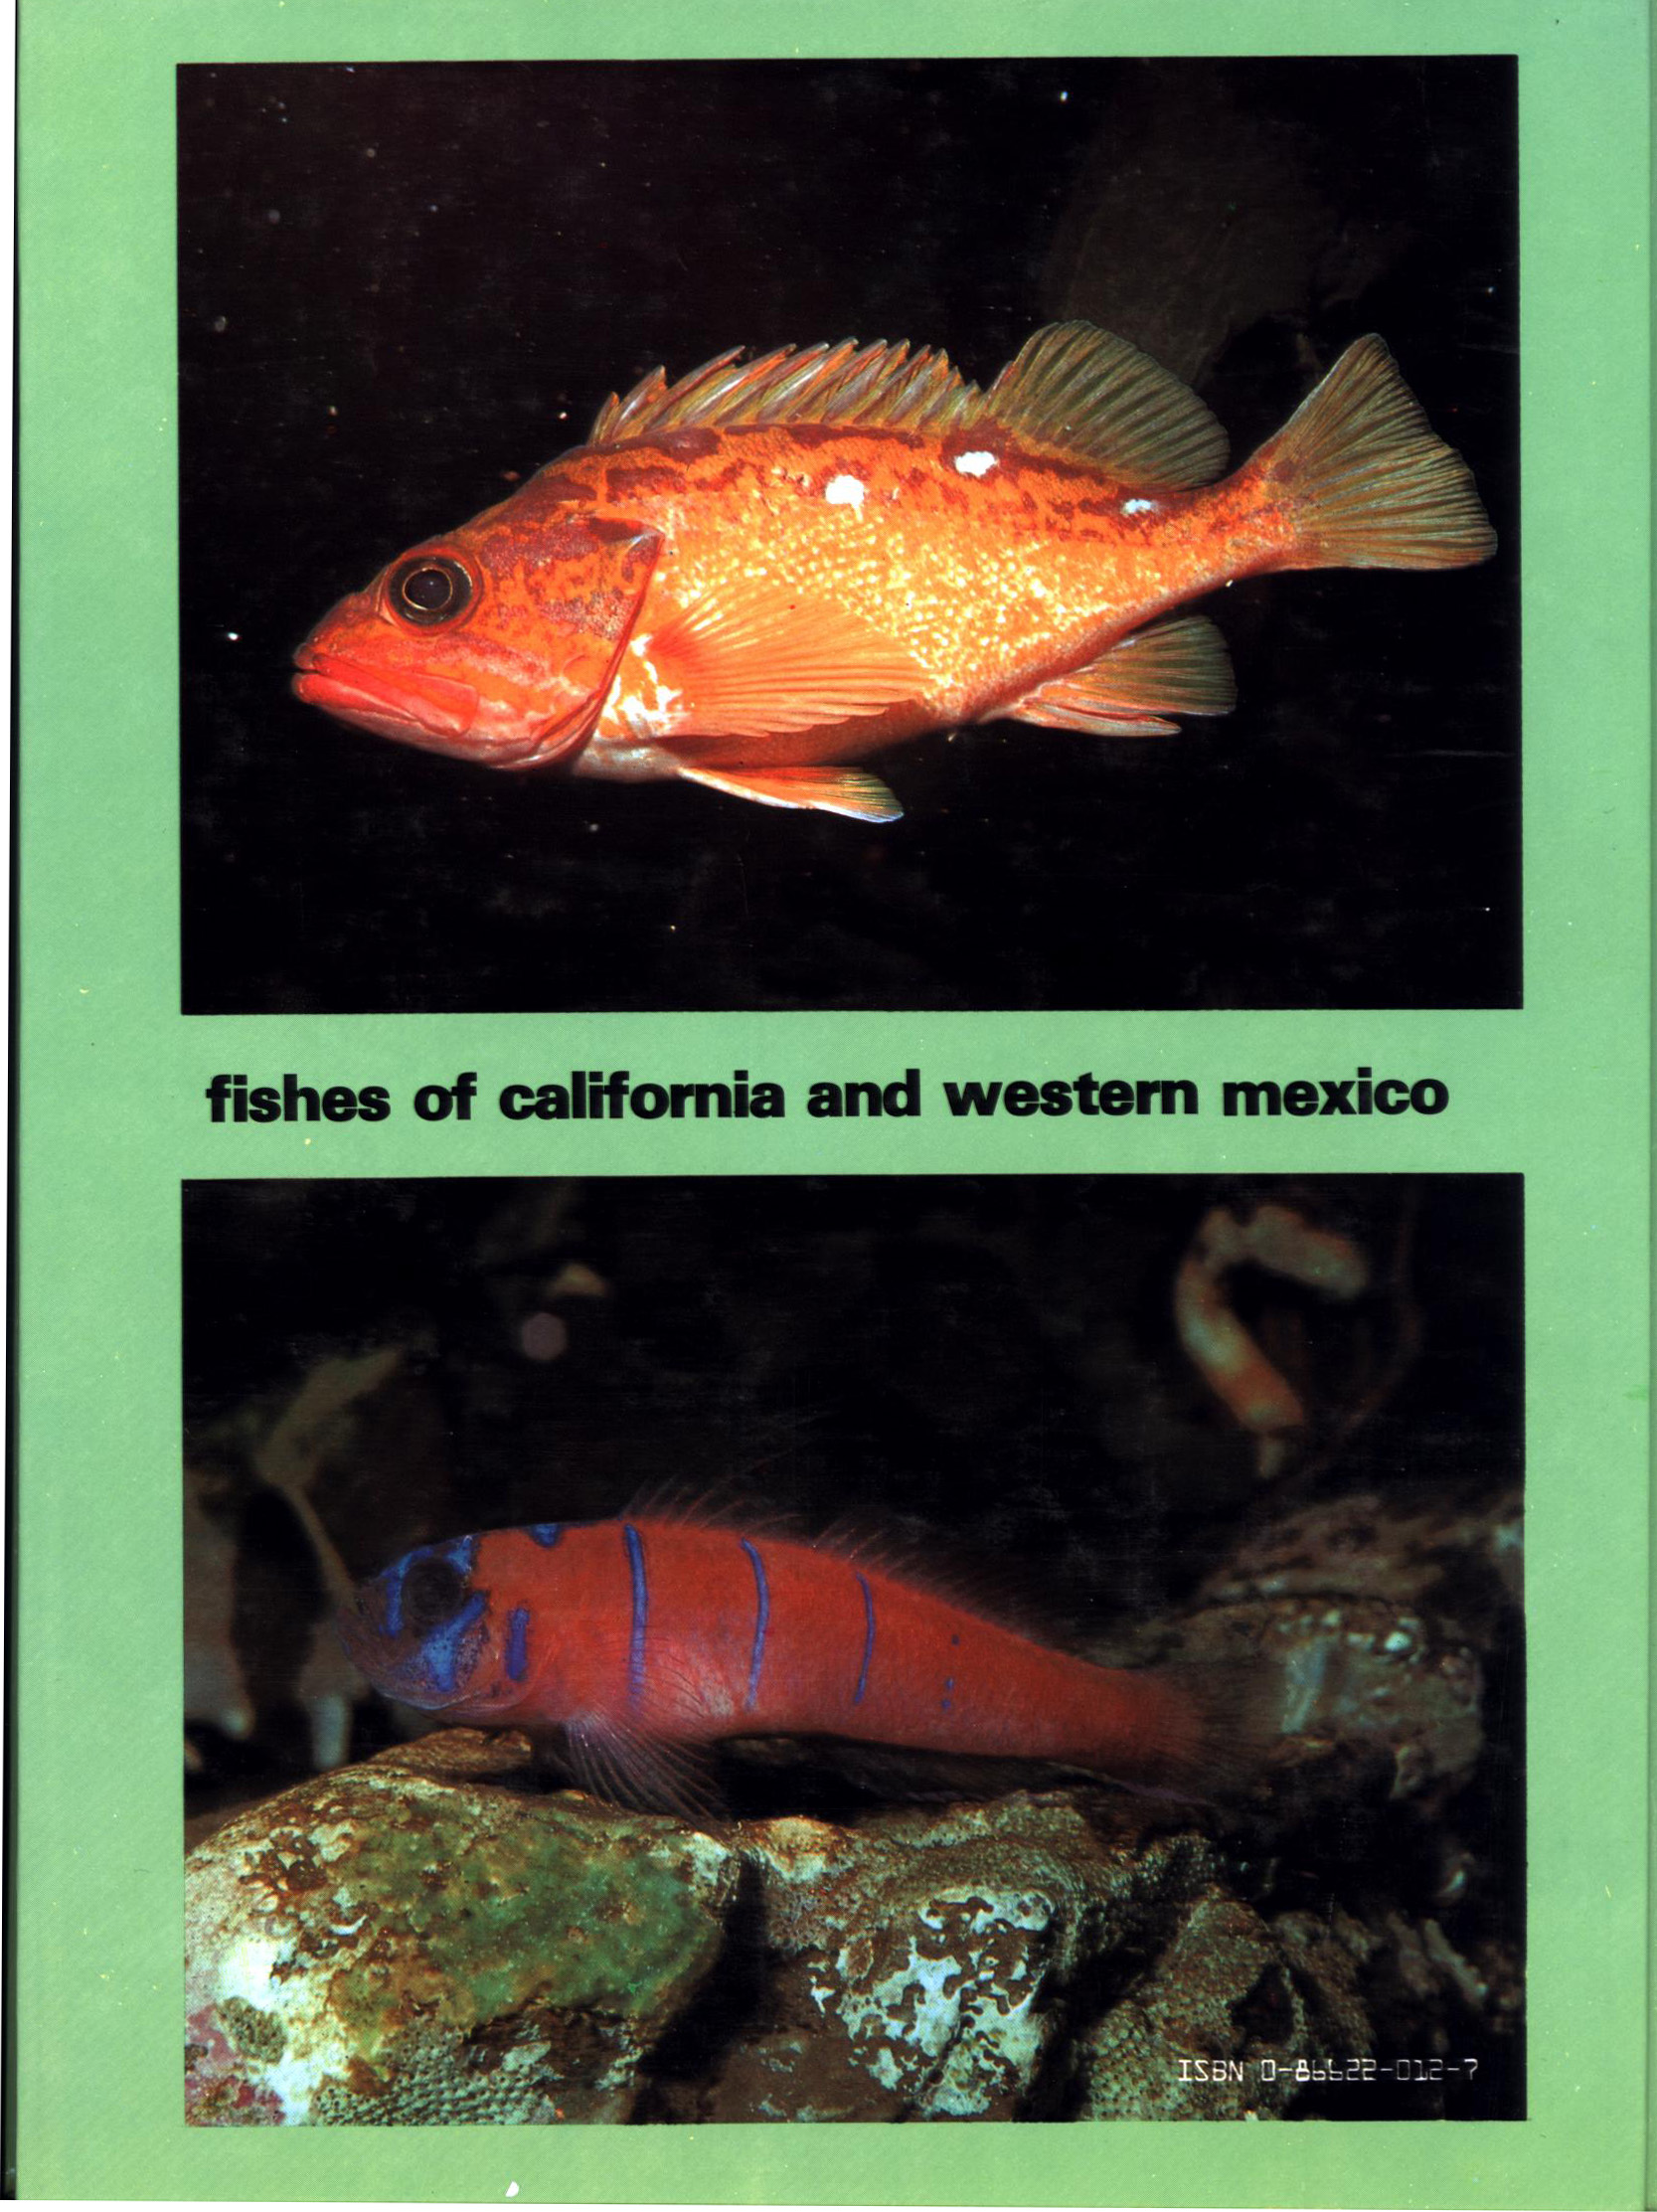 FISHES OF CALIFORNIA AND WESTERN MEXICO: Pacific marine fishes, Book 8 (California & Western Mexico). tfhp6102k